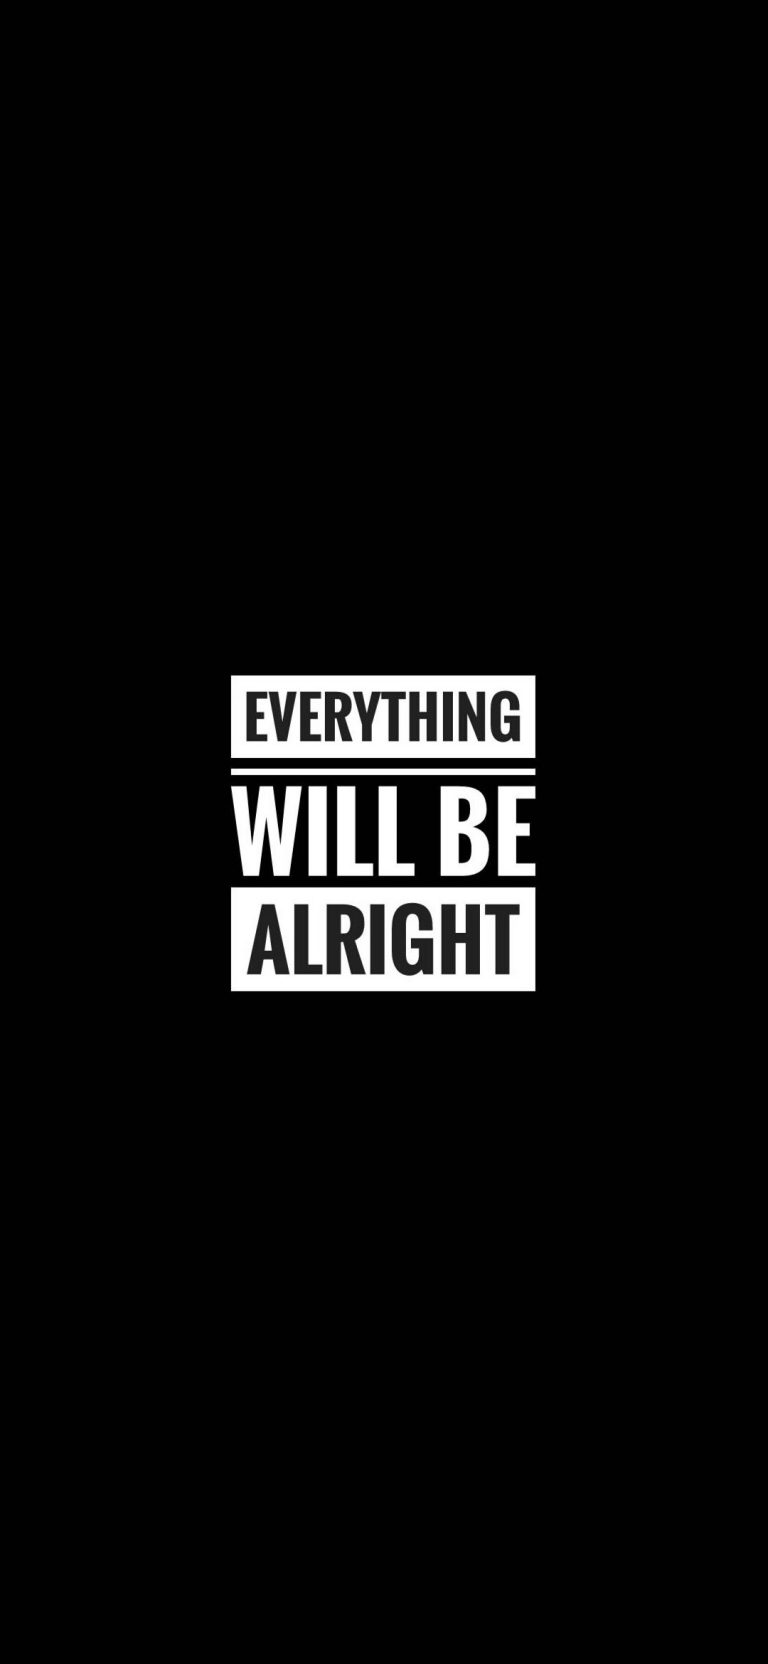 Everything Will Be Alright - Motivational Wallpaper